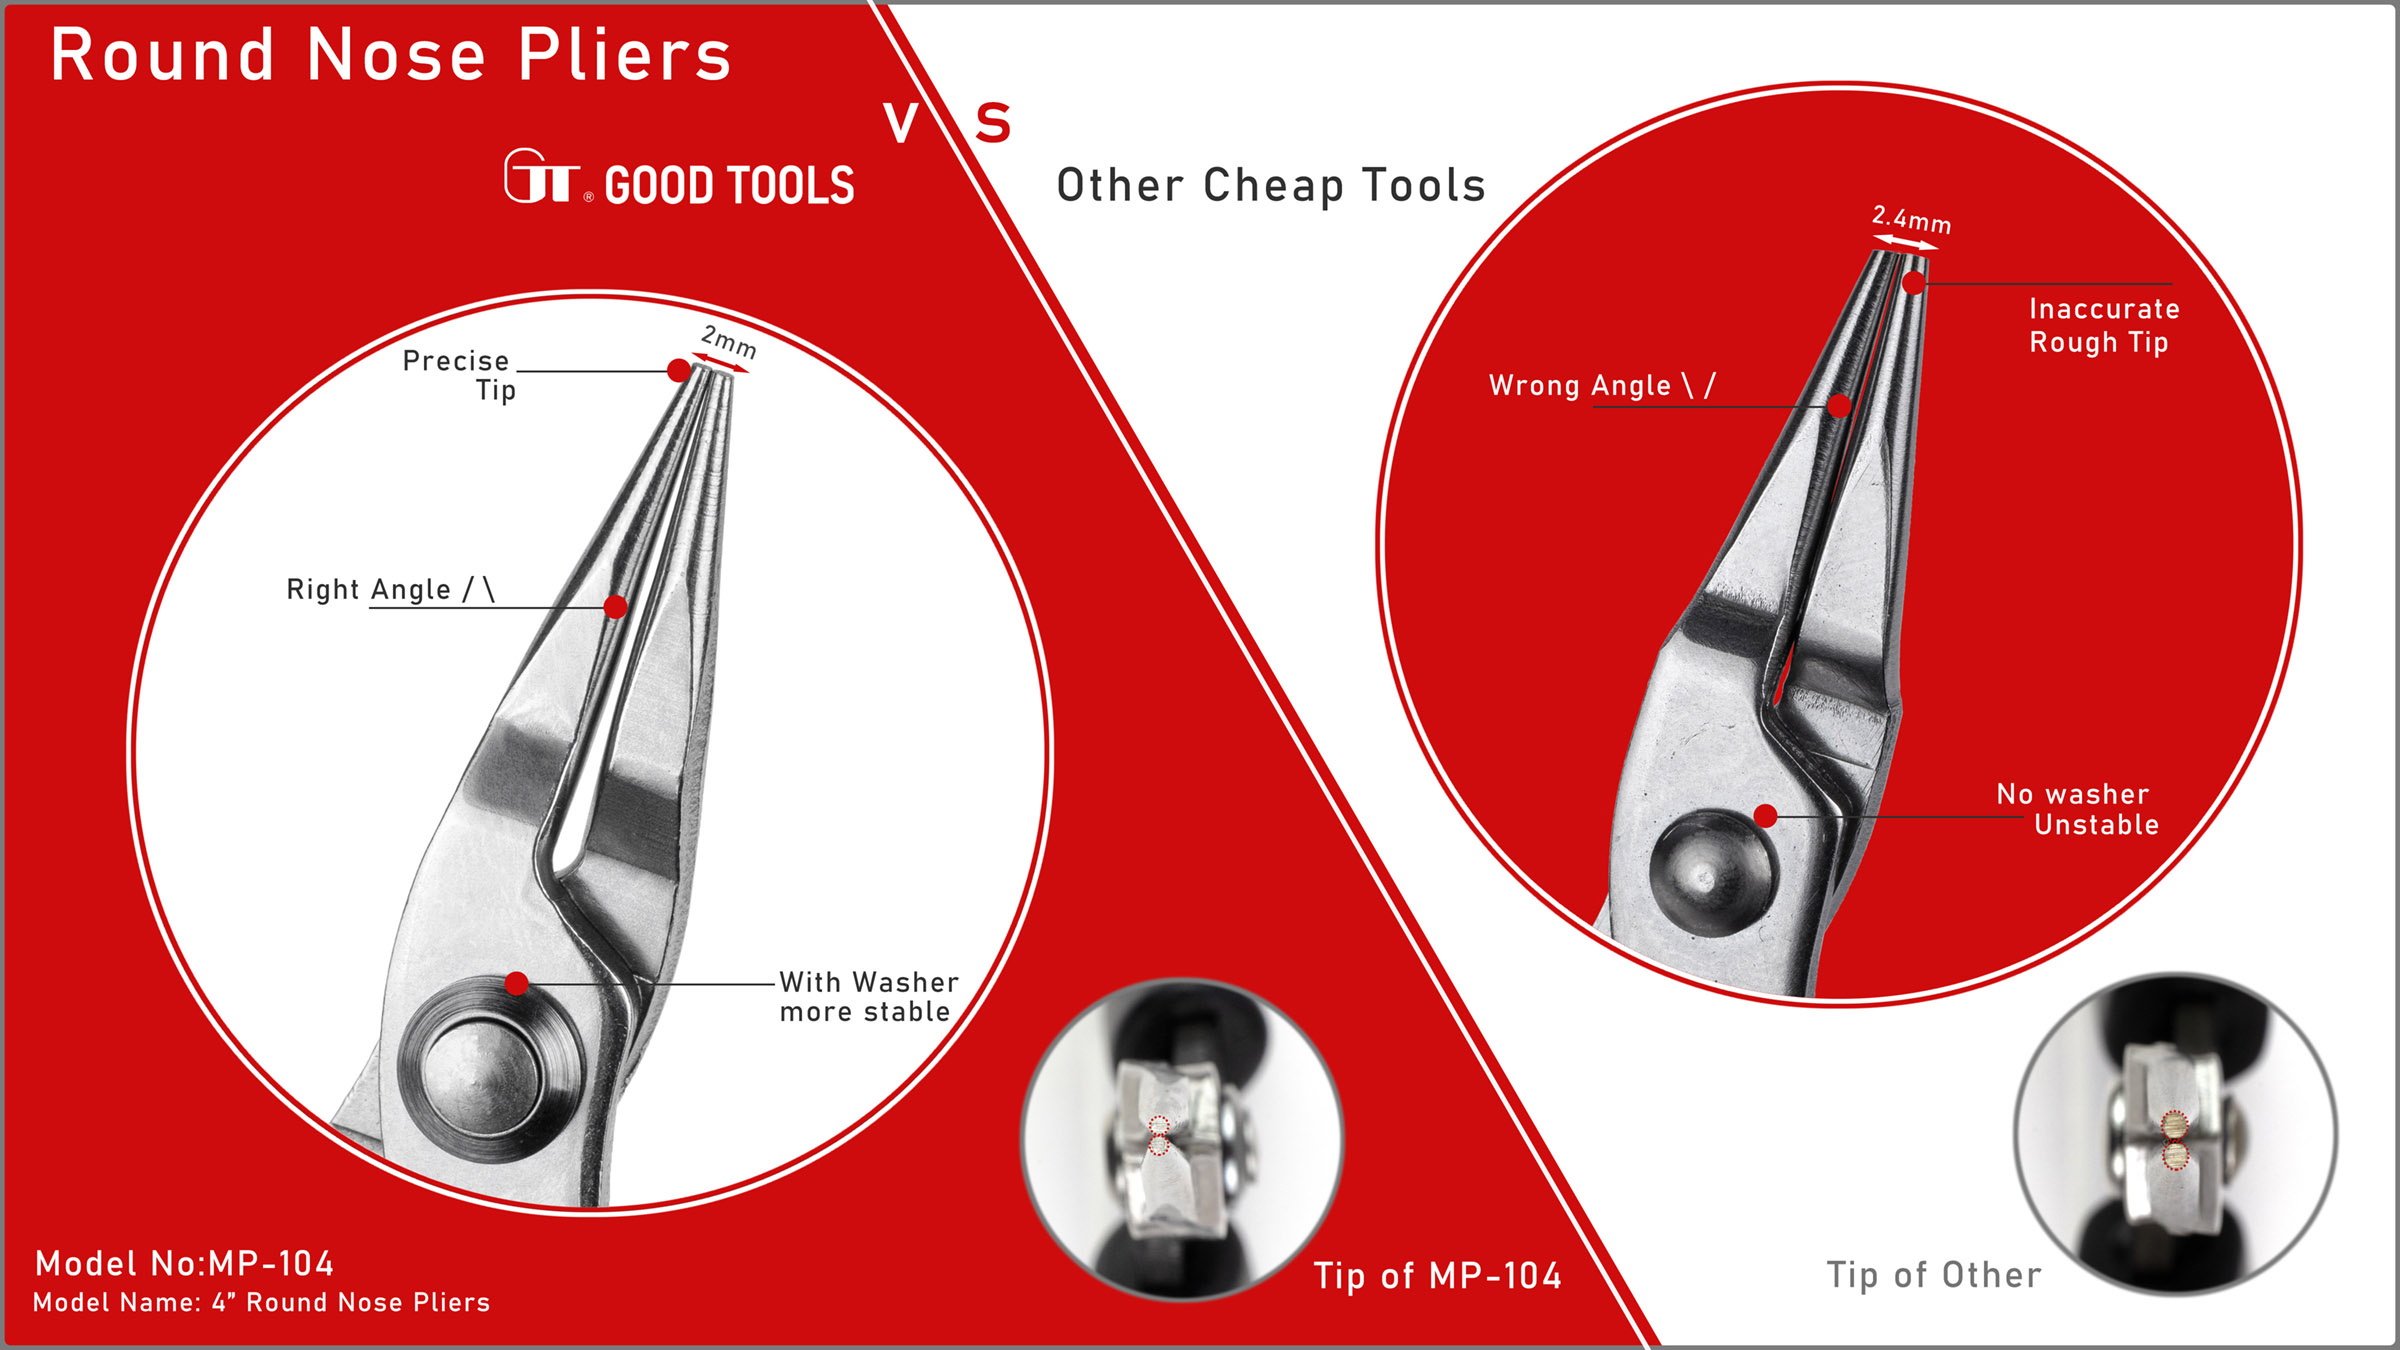 proimages/product/pliers/gripping_pliers/Round_Nose_Pliers/MP-104/MP-104__Compare.jpg